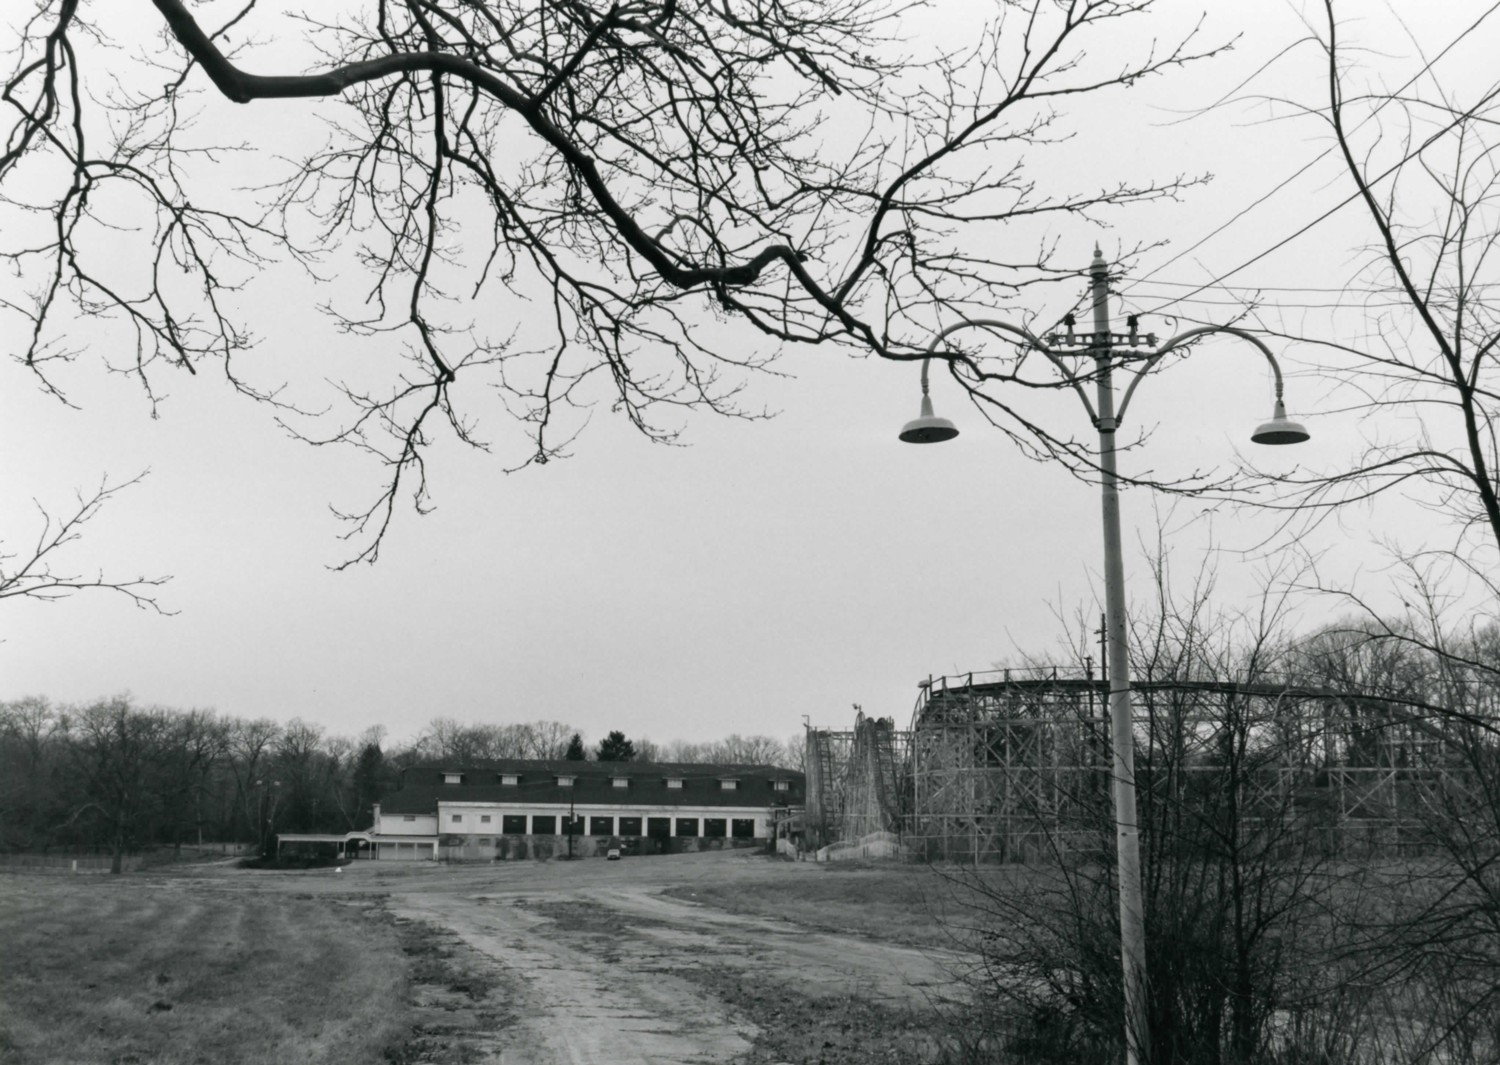 Idora Park, Youngstown Ohio Distant view of the park from the main southeast entrance, showing an historic lamp post in the foreground, the Jack Rabbit roller coaster at right and the ballroom at left. At far left is the entrance gate. (1992)